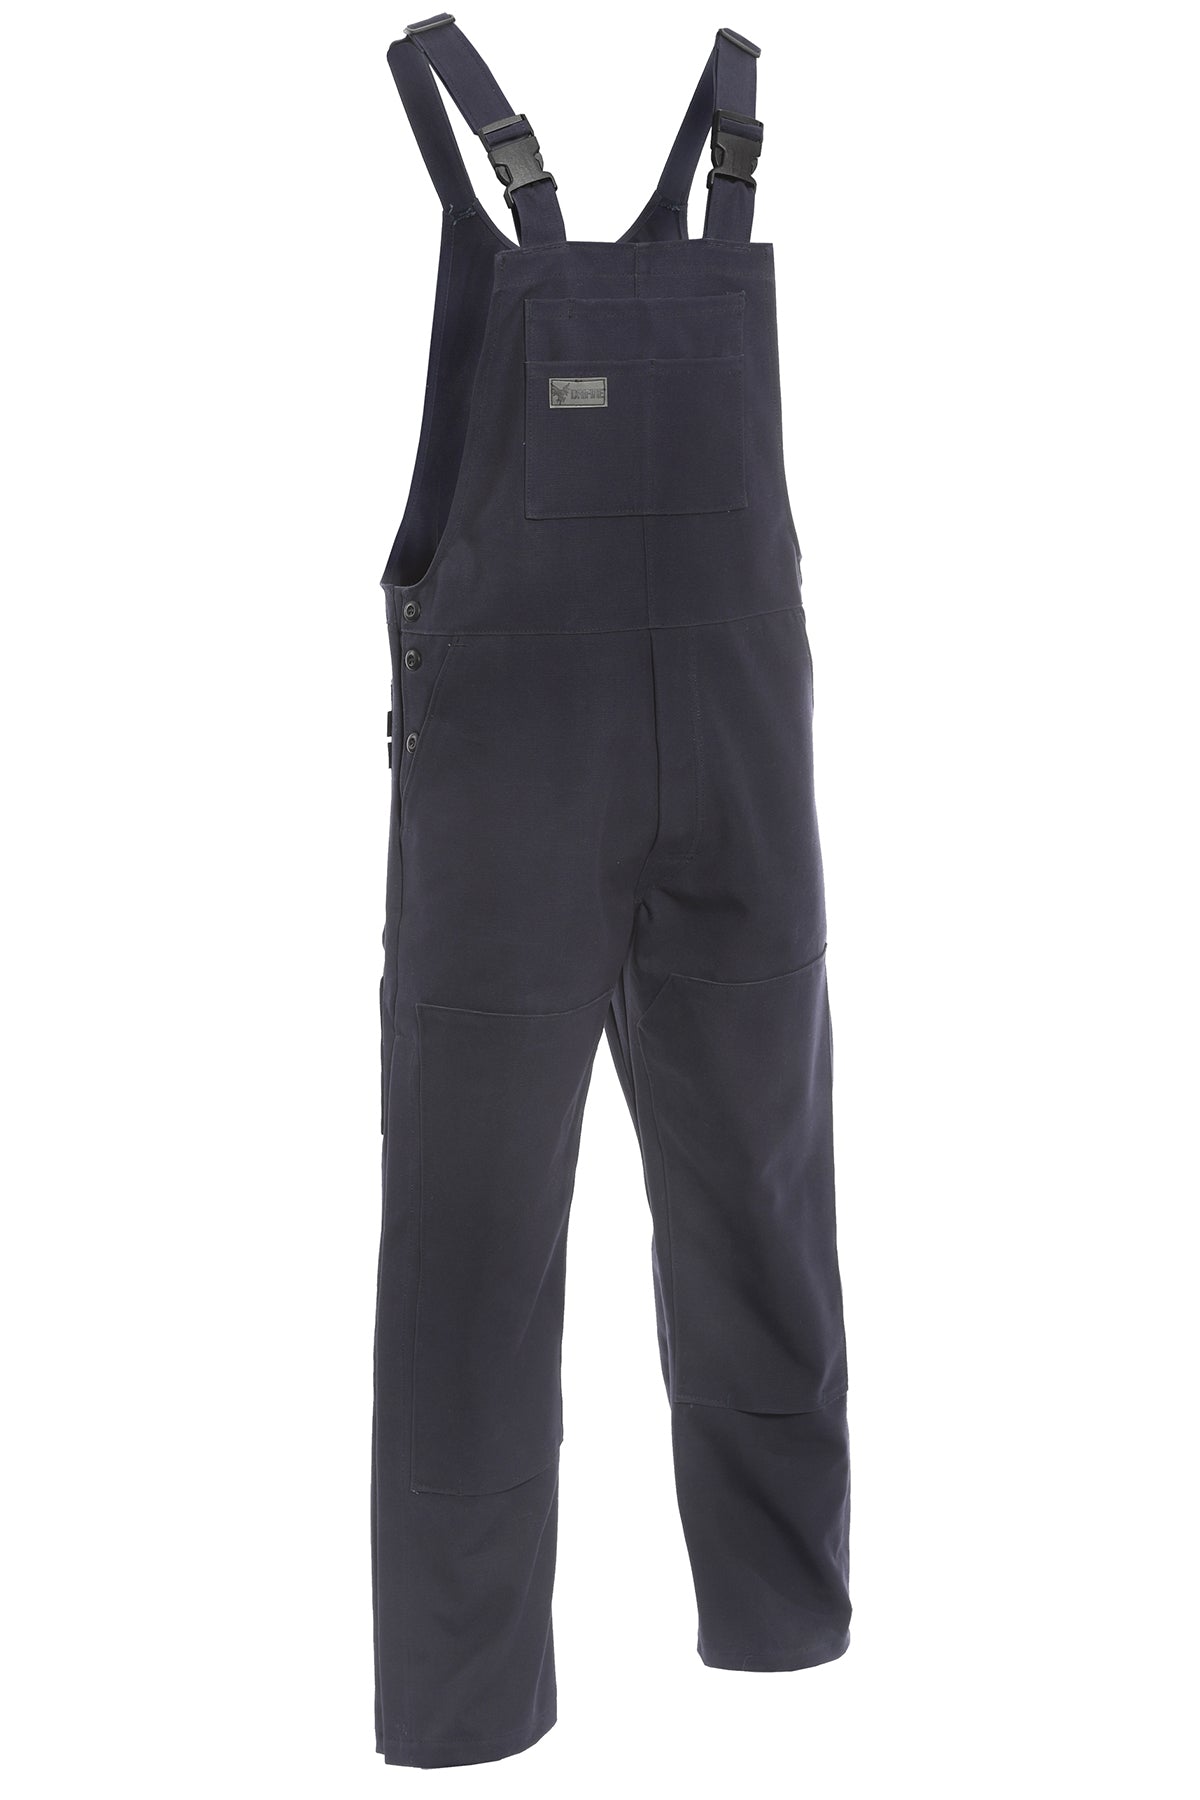 National Safety Apparel Drifire FR Unlined Bib Overall, 16 cal/cm²